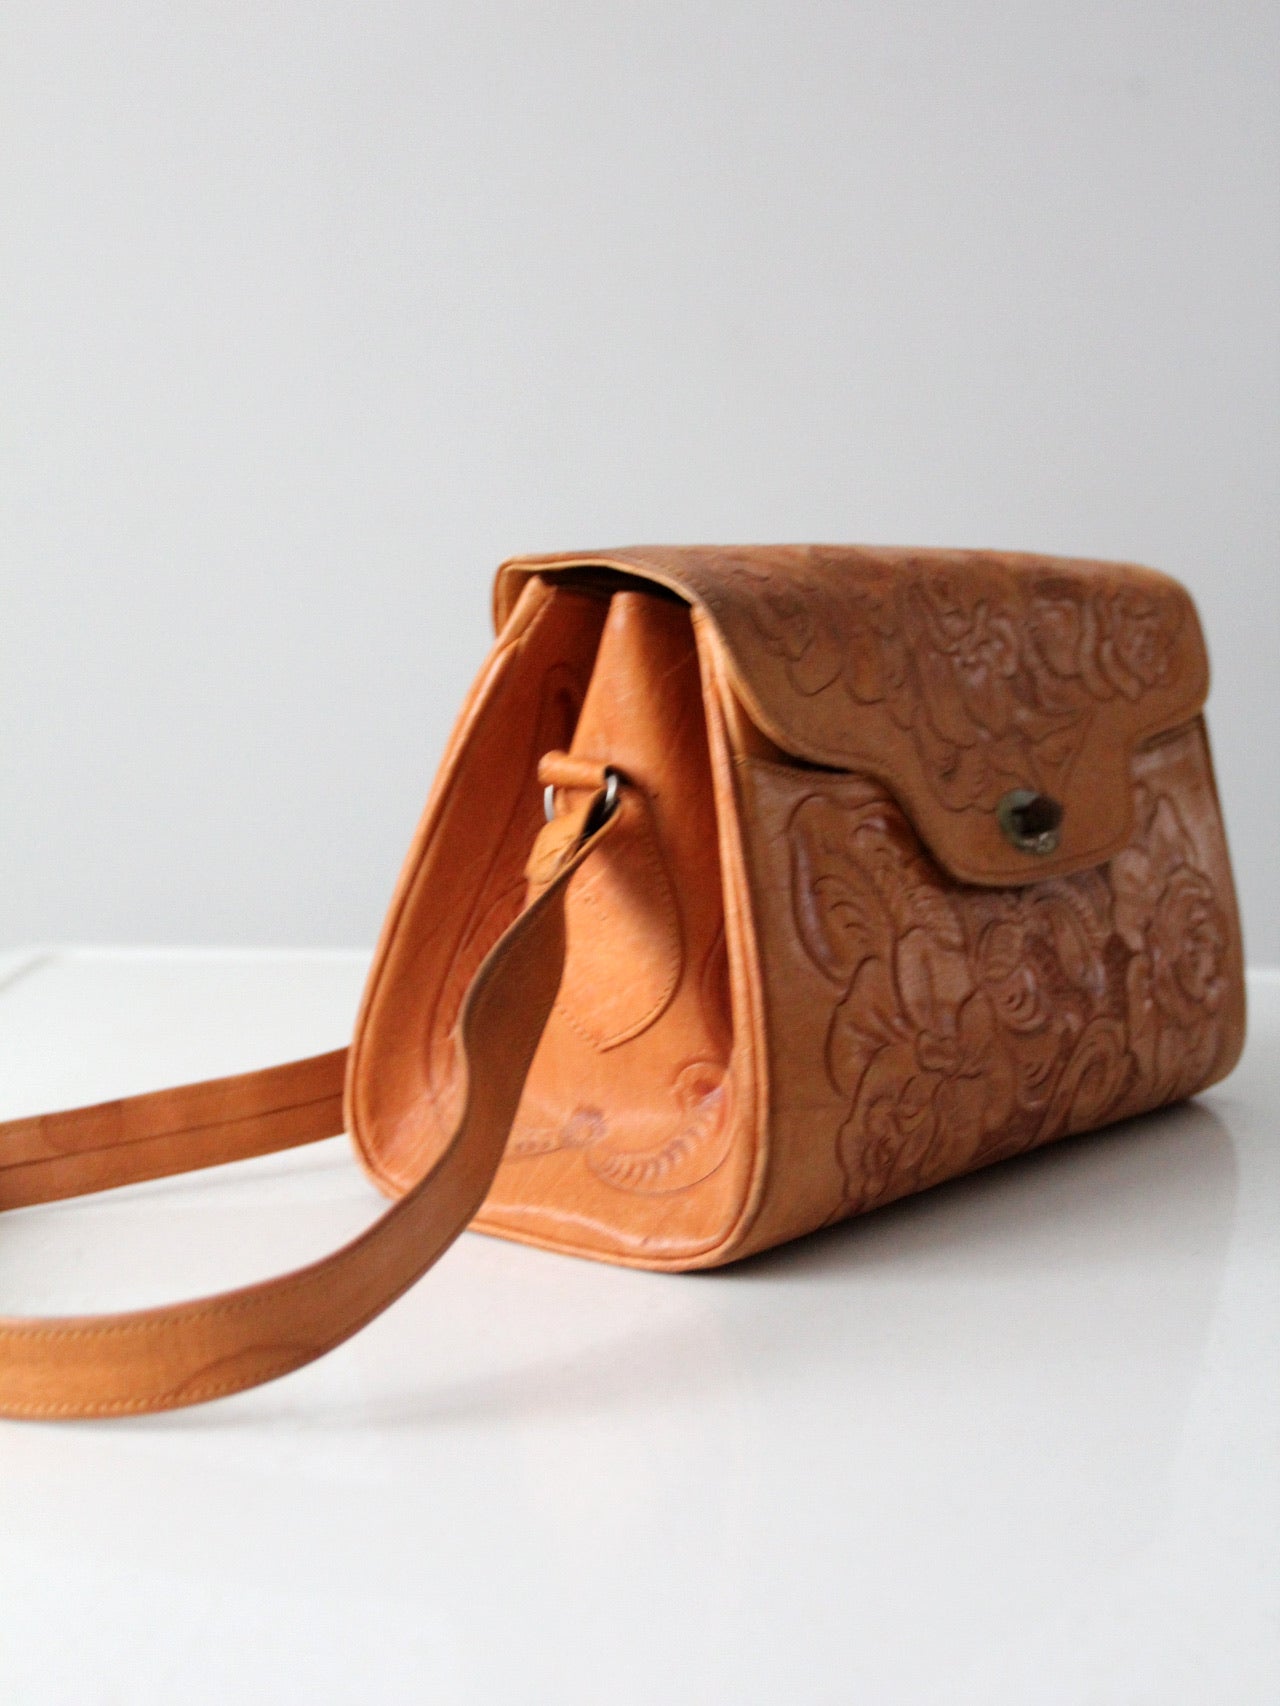 Vintage Leather Bags - Vintage Leather Bags buyers, suppliers, importers,  exporters and manufacturers - Latest price and trends